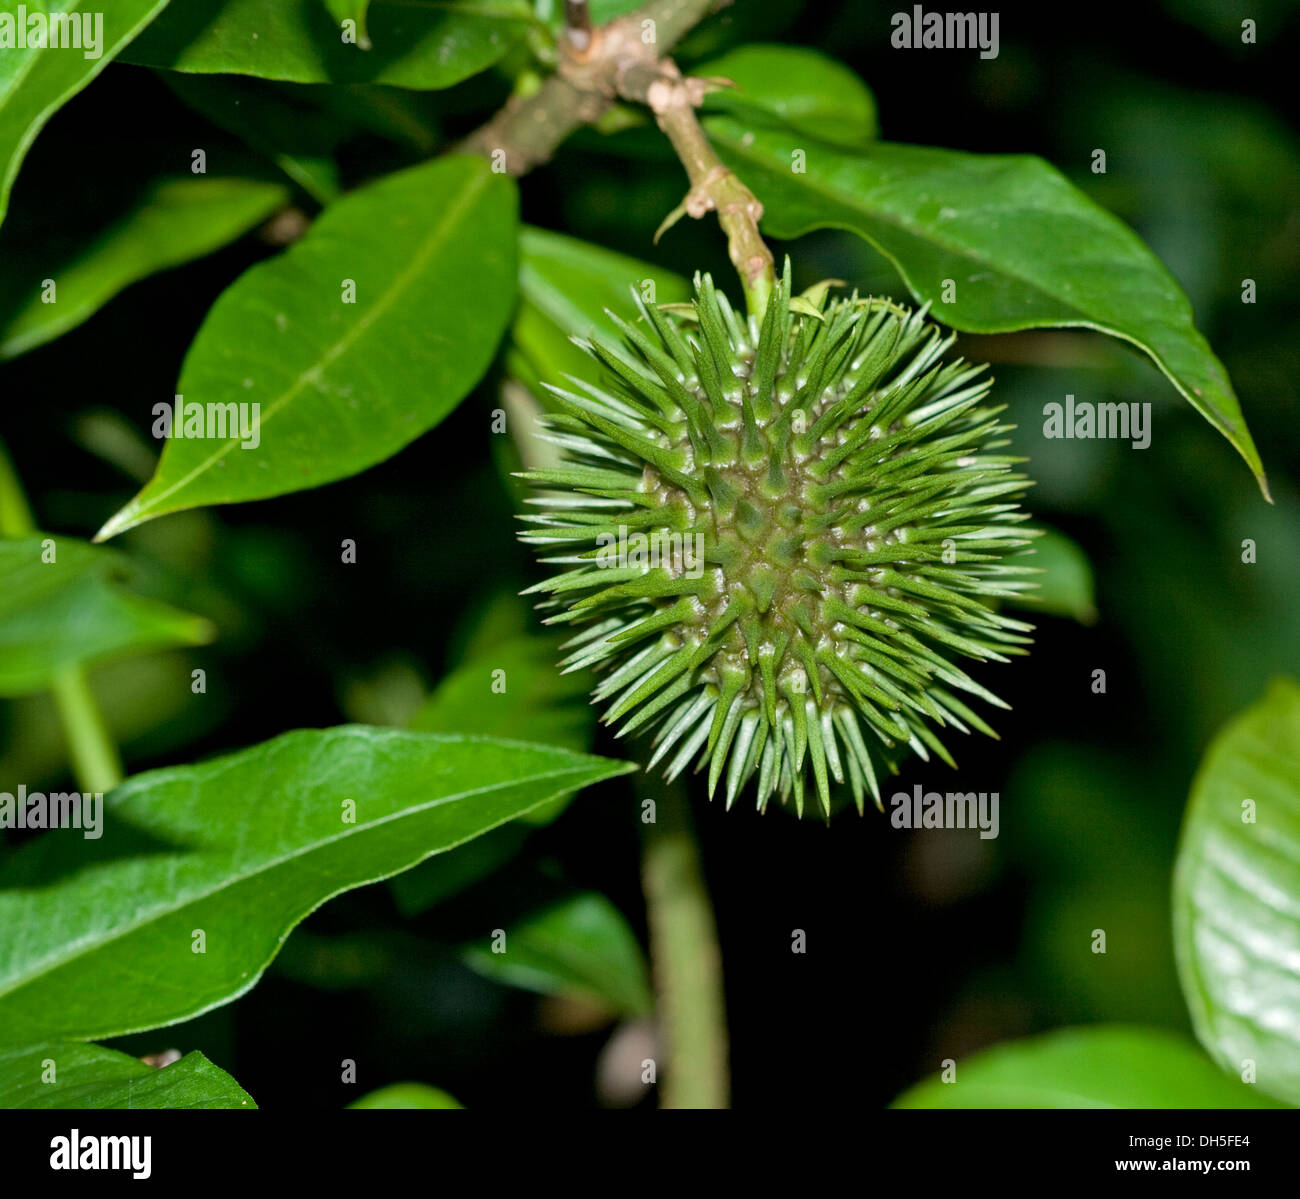 Green spiny seed pod and bright emerald green leaves of Allamanda schottii Stock Photo